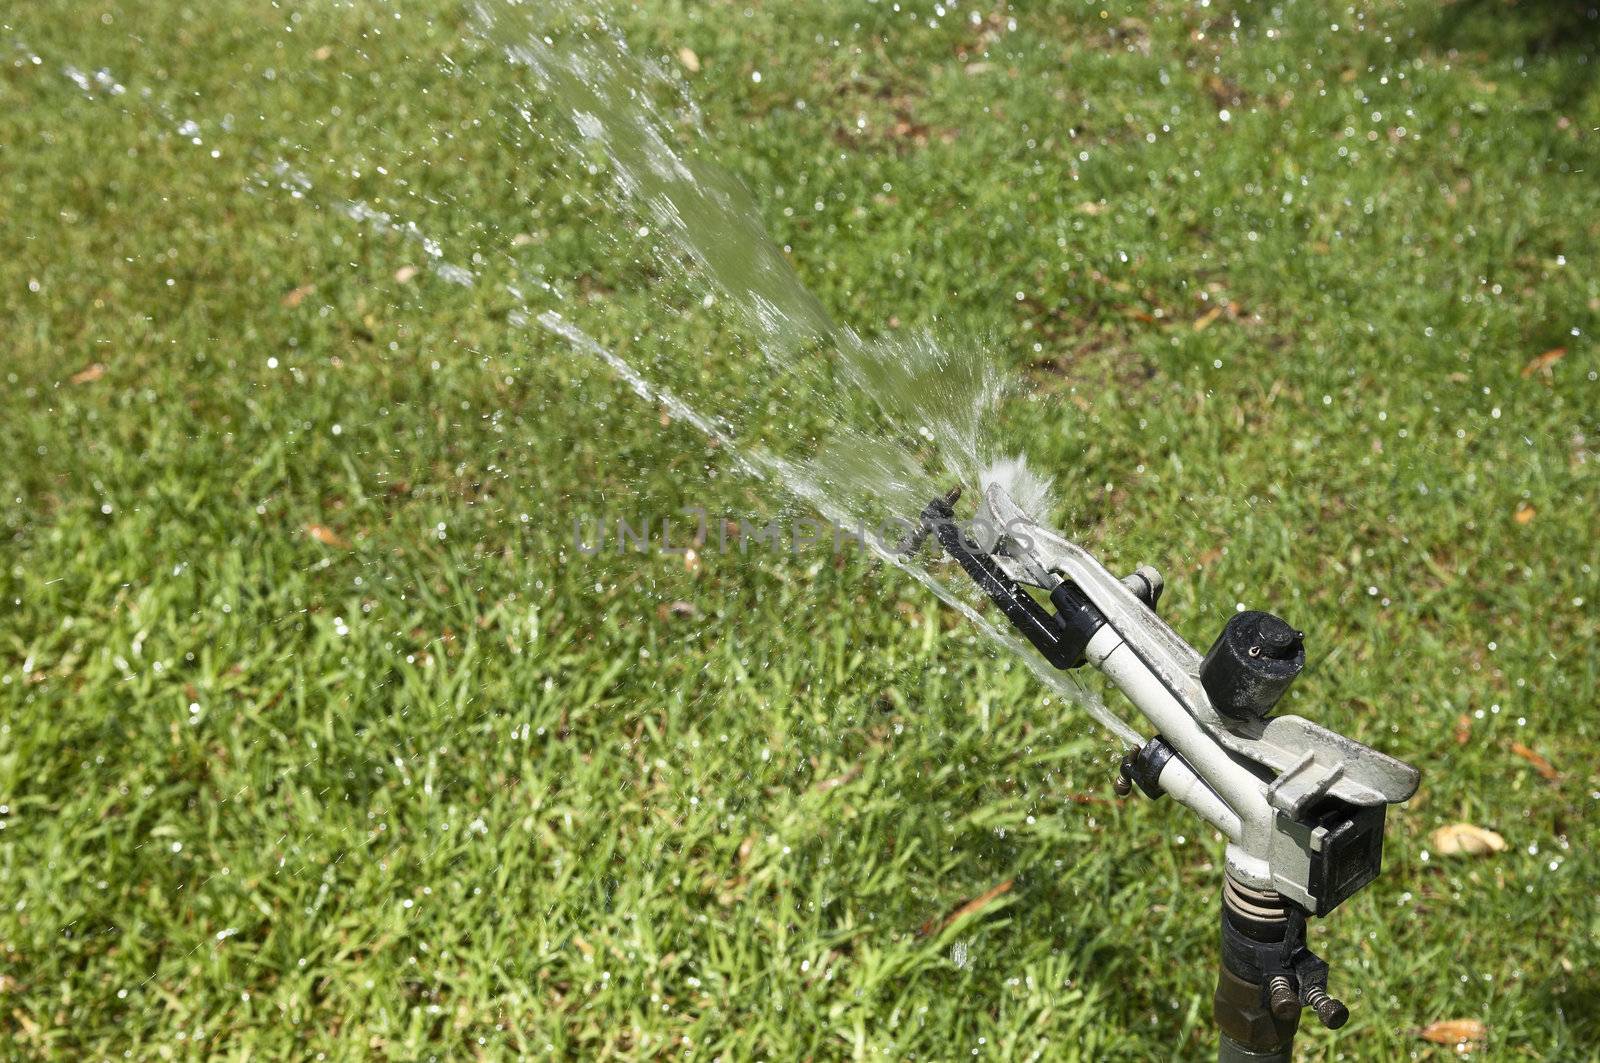 Detail of an automatic sprinkler irrigating a lawn